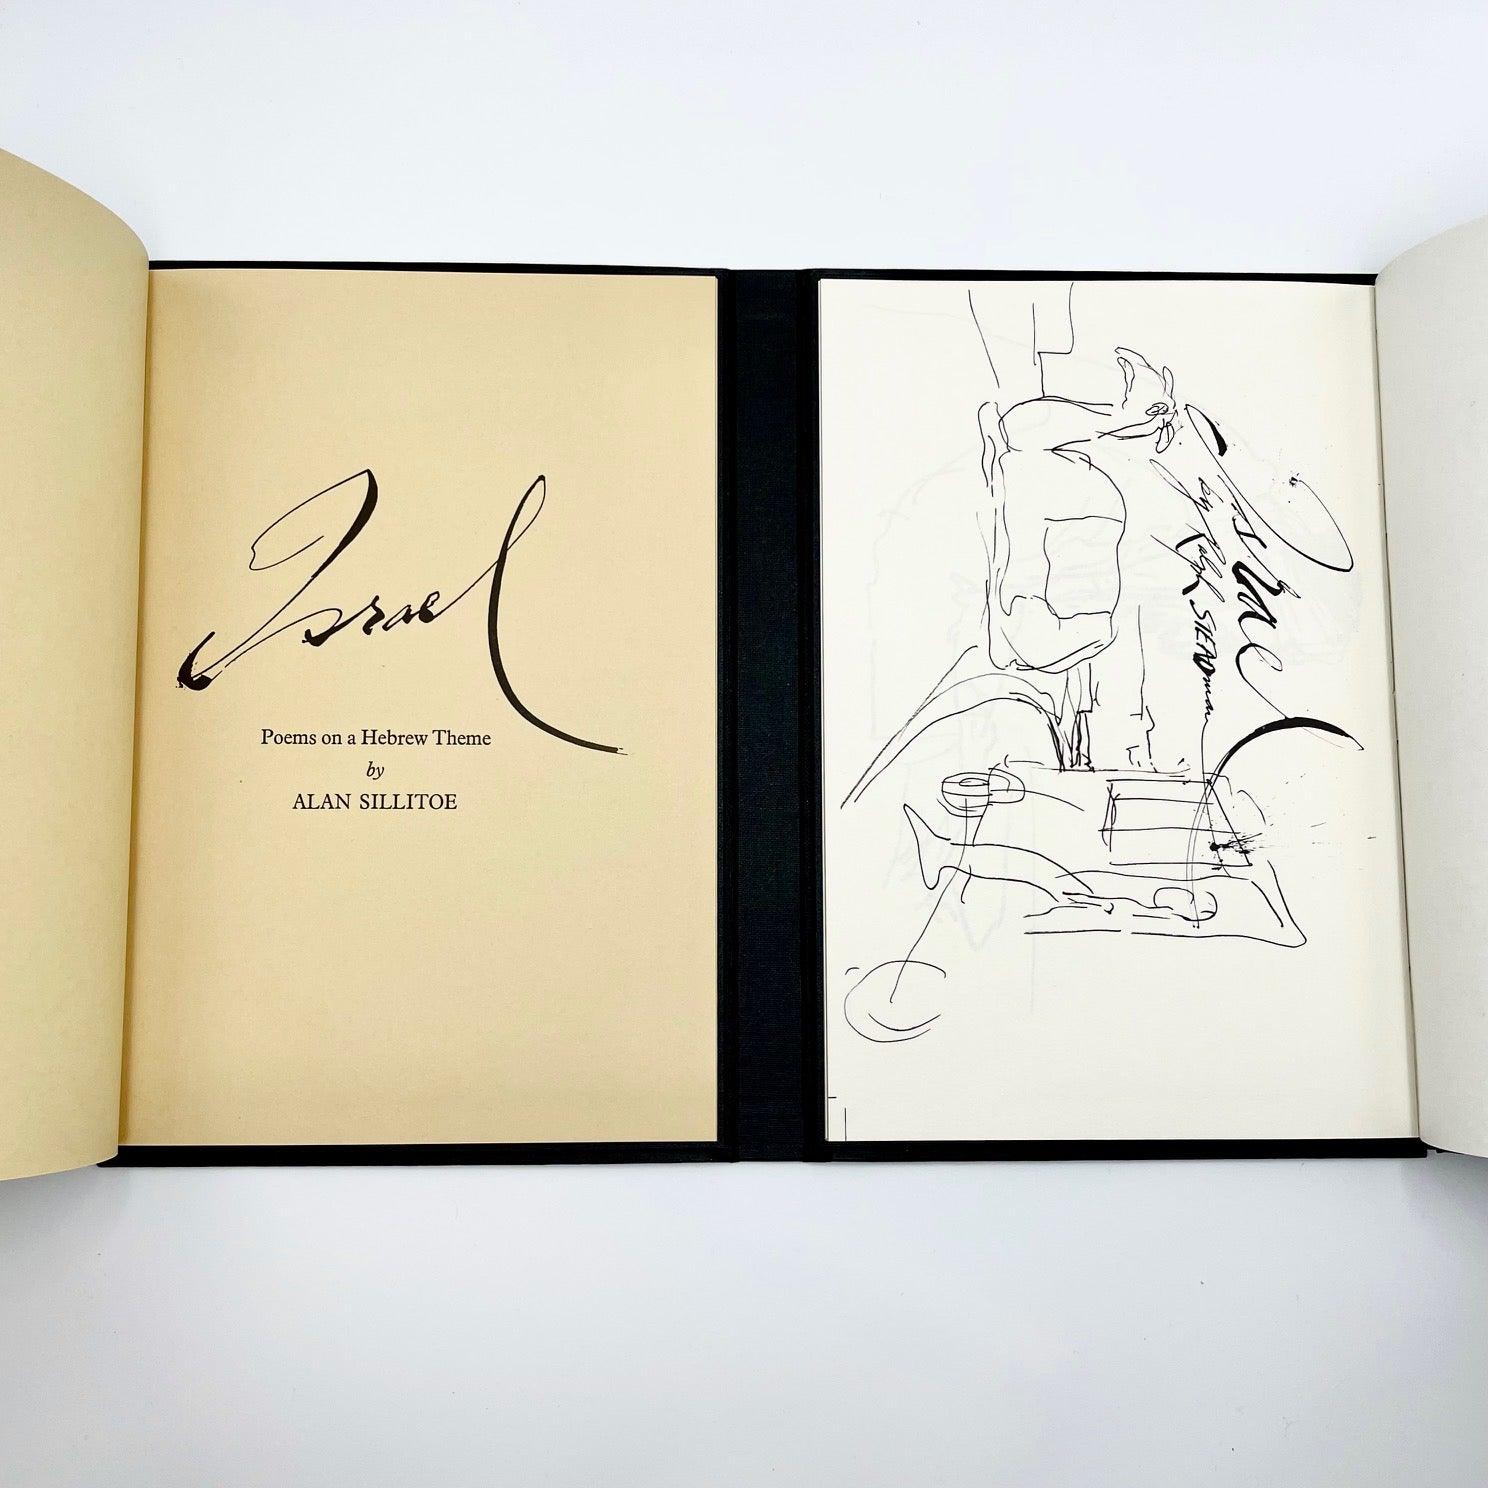 Israel: Poems on a Hebrew Theme (signed by Alan Sillitoe and Ralph Steadman (illustrator)) - Grinning Cat Books - Books - ILLUSTRATED BOOKS